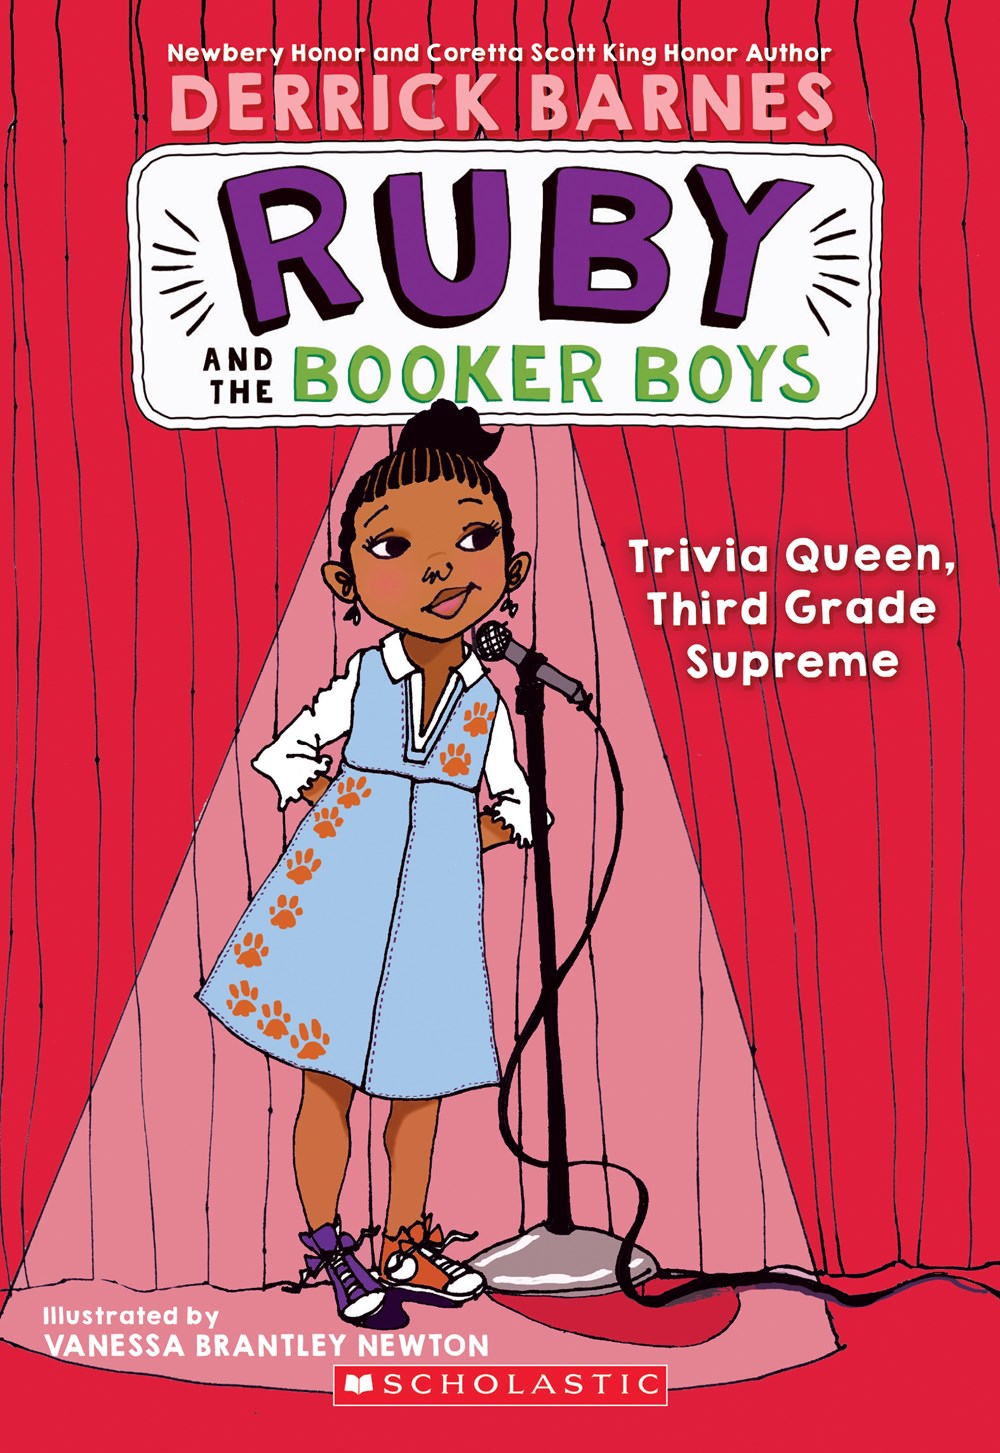 Trivia Queen, 3rd Grade Supreme (Ruby and the Booker Boys #2)